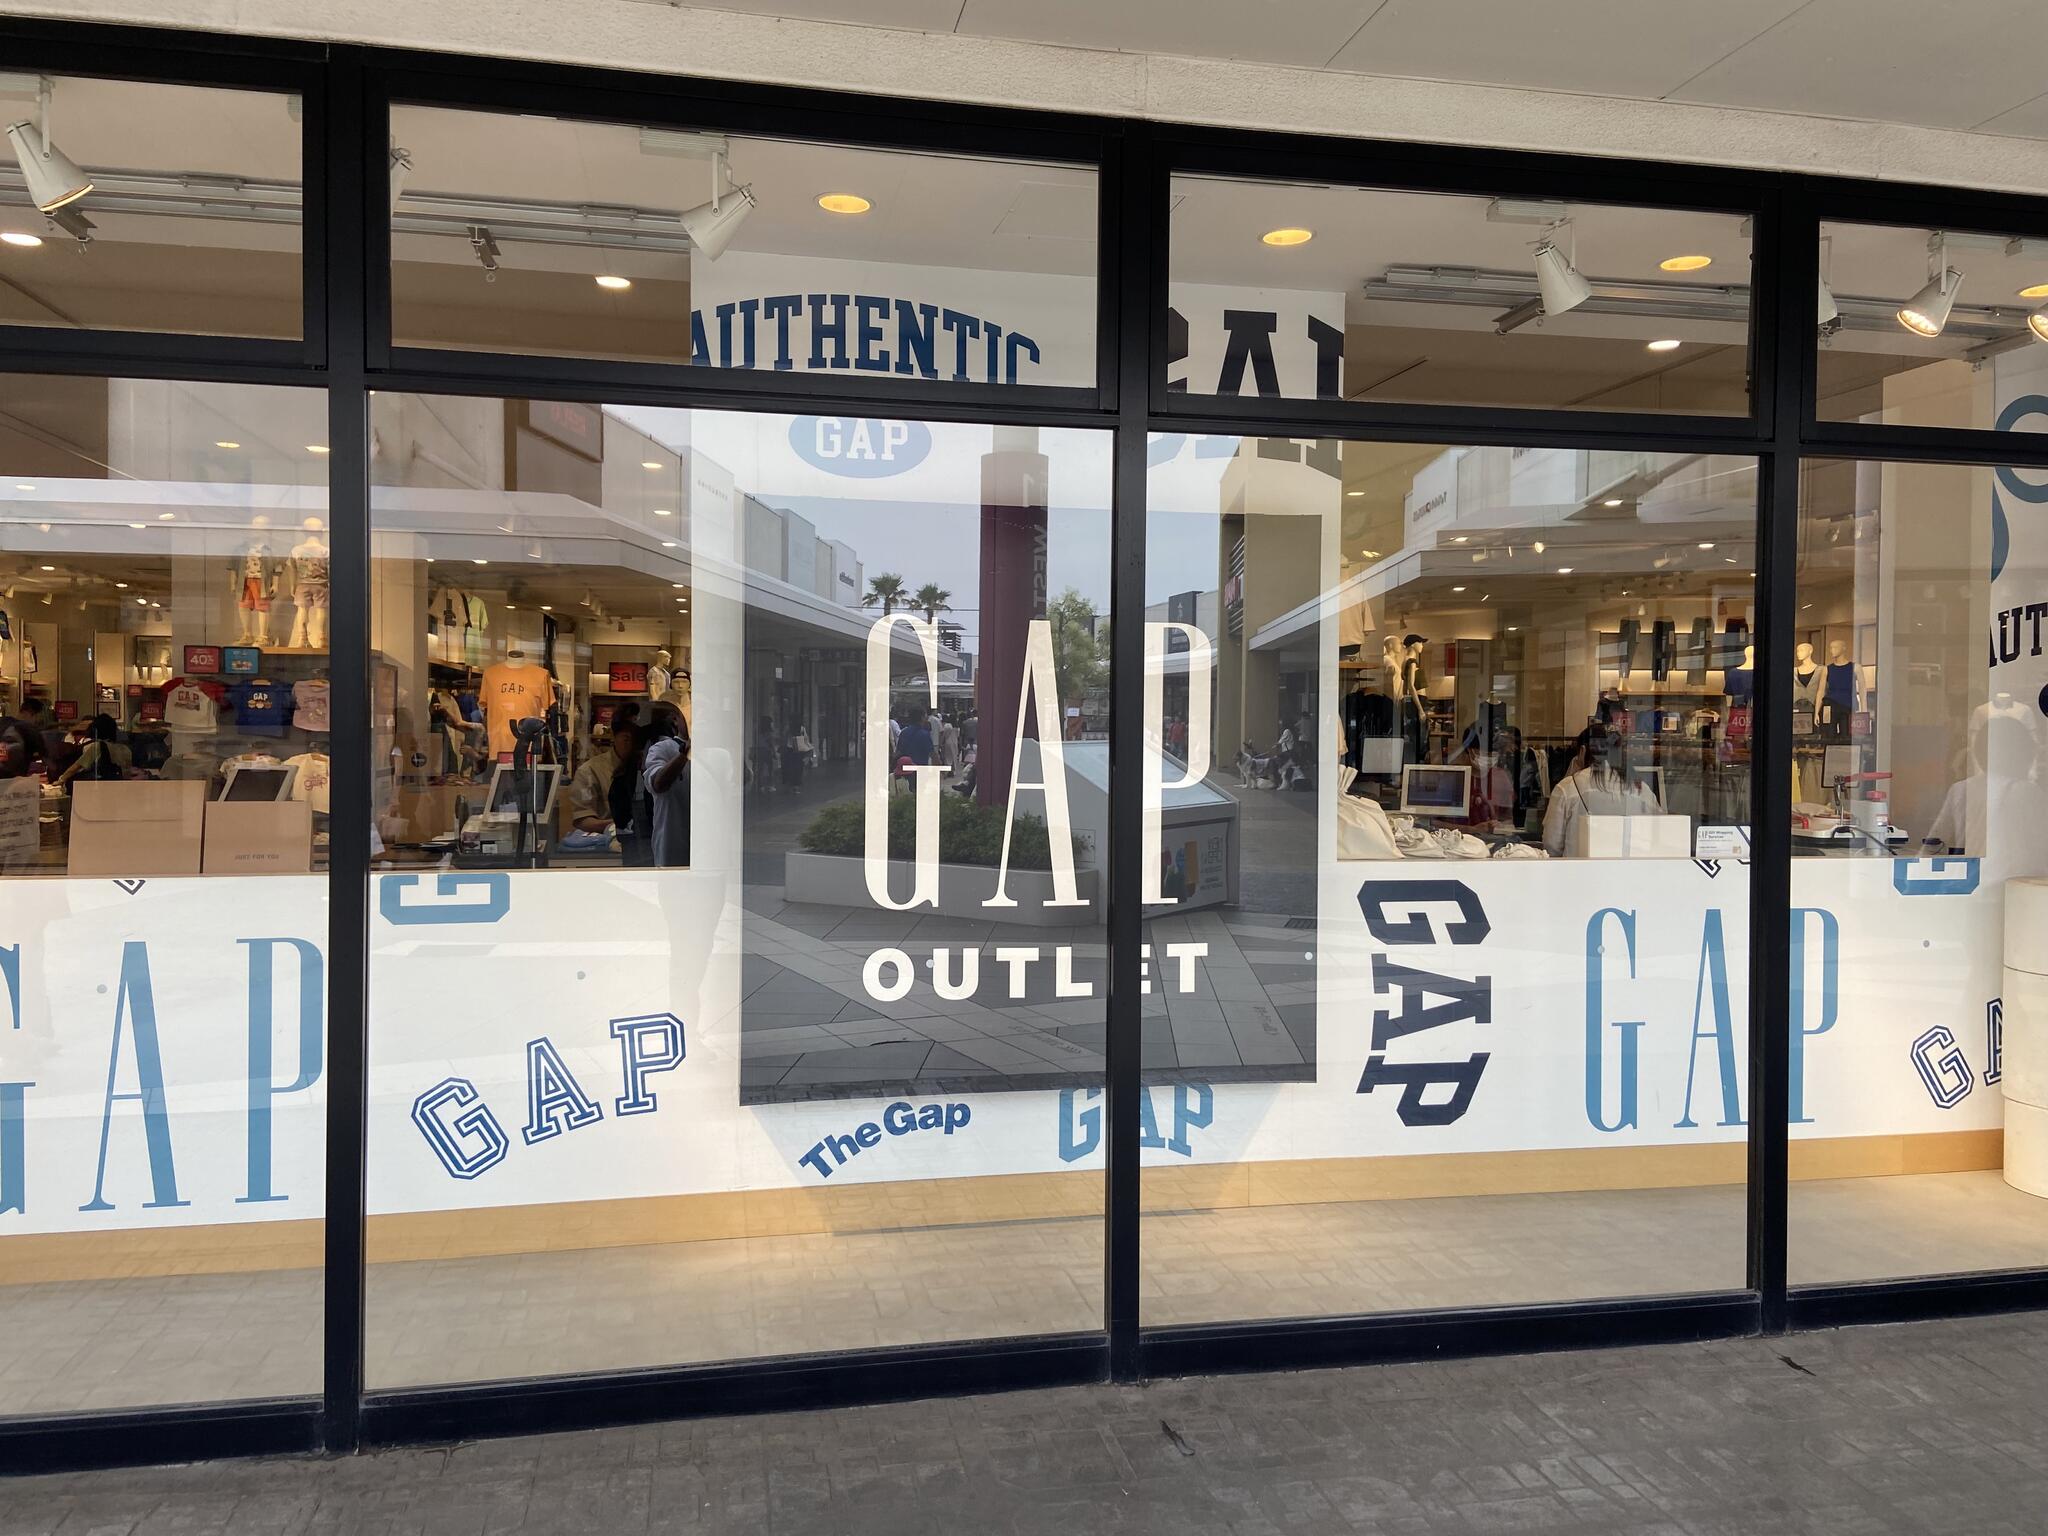 GAP Outlet 三井アウトレットパーク木更津店の代表写真7